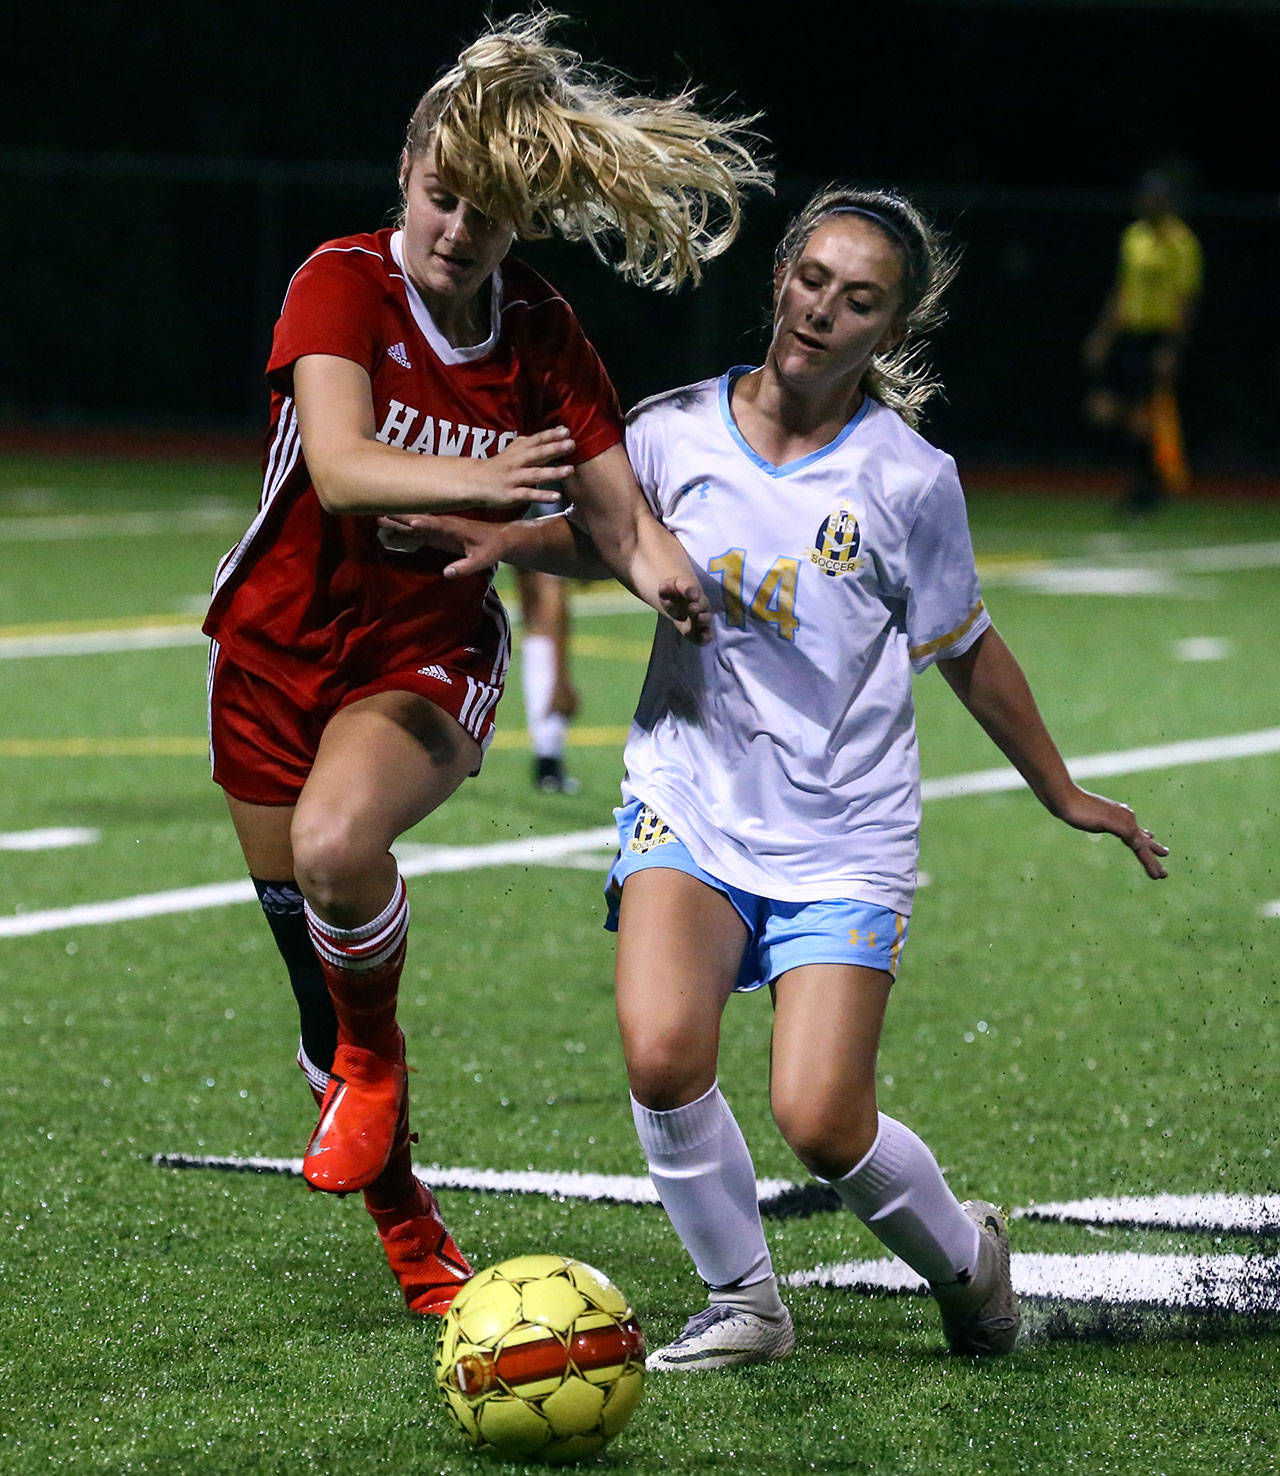 Mountlake Terrace’s Avery Coleman (left) and Everett’s Sydney Sesso battle for control of the ball during a Wesco 3A match Tuesday night at Lynnwood High School in Bothell. (Kevin Clark / The Herald)